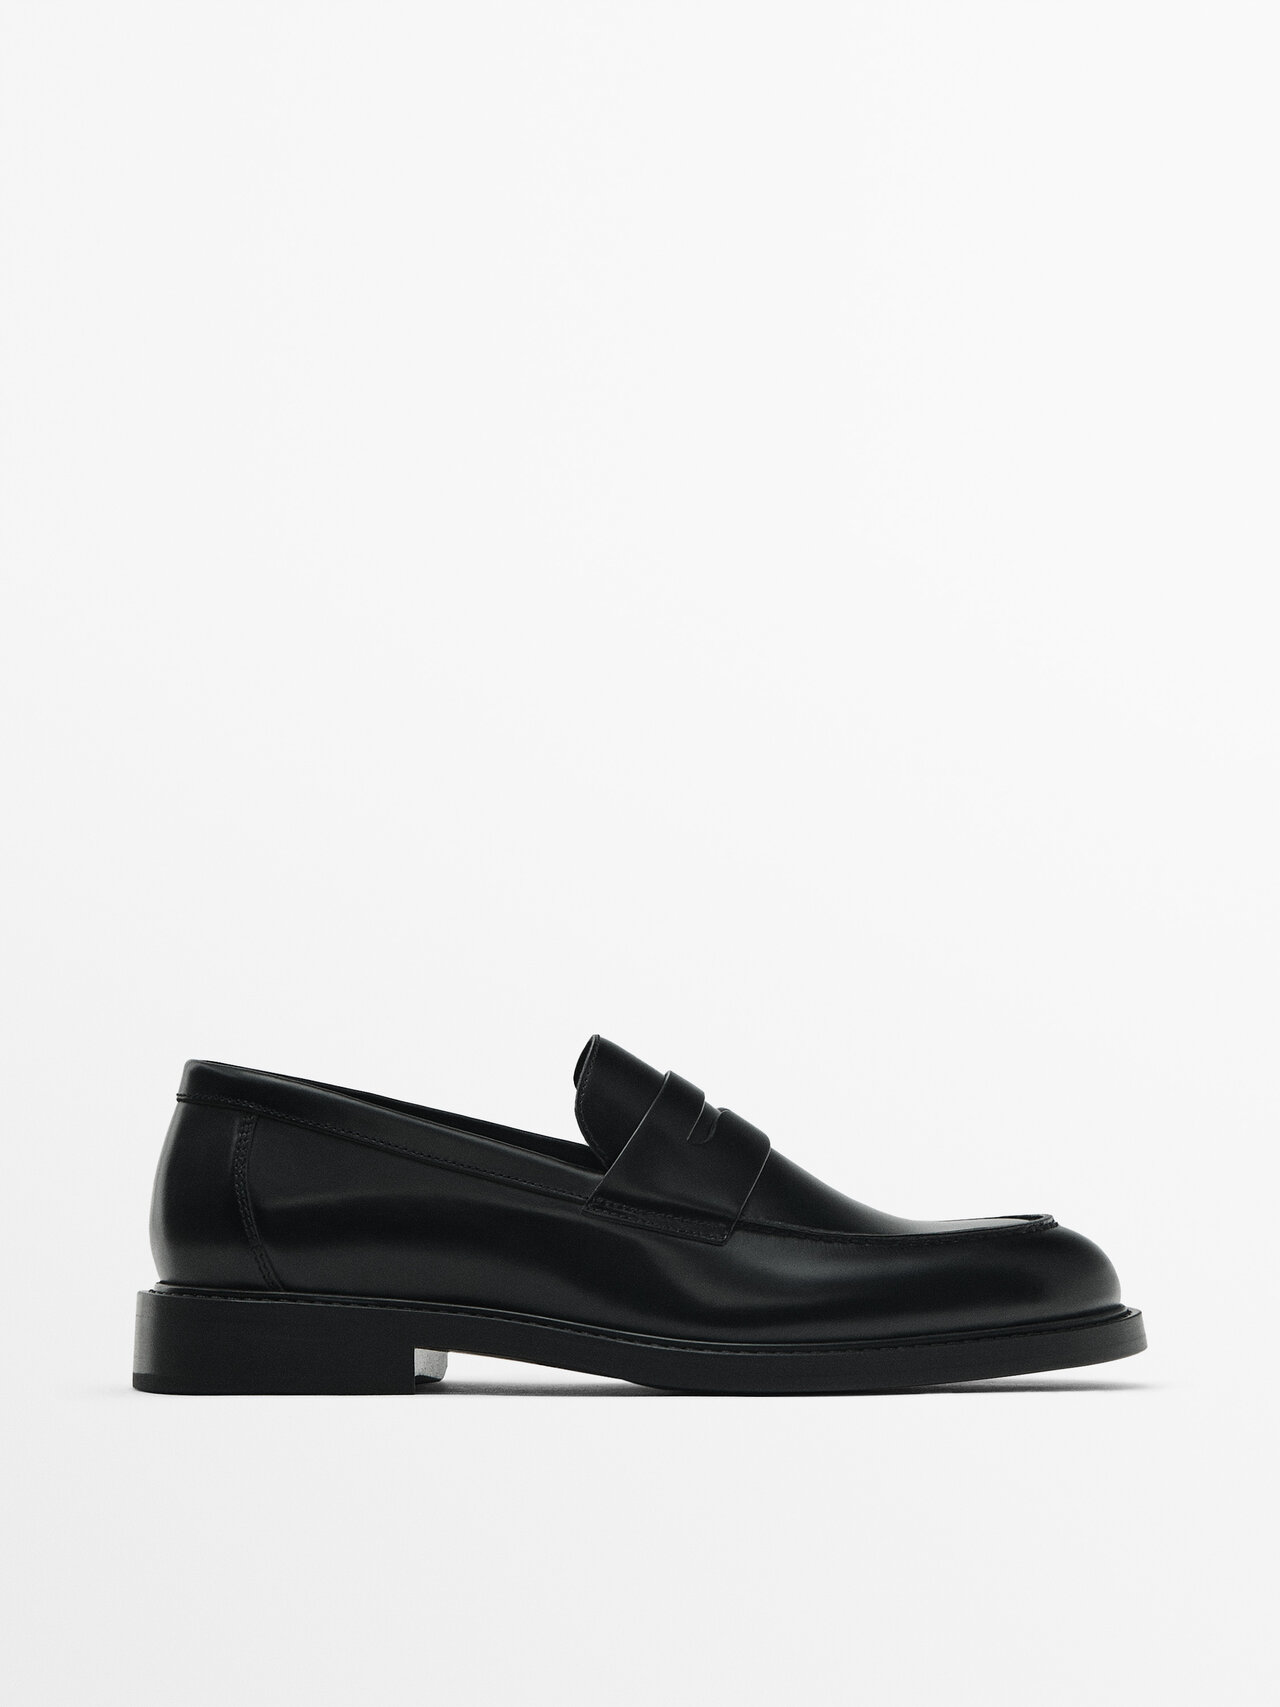 Massimo Dutti Black Leather Penny Loafers